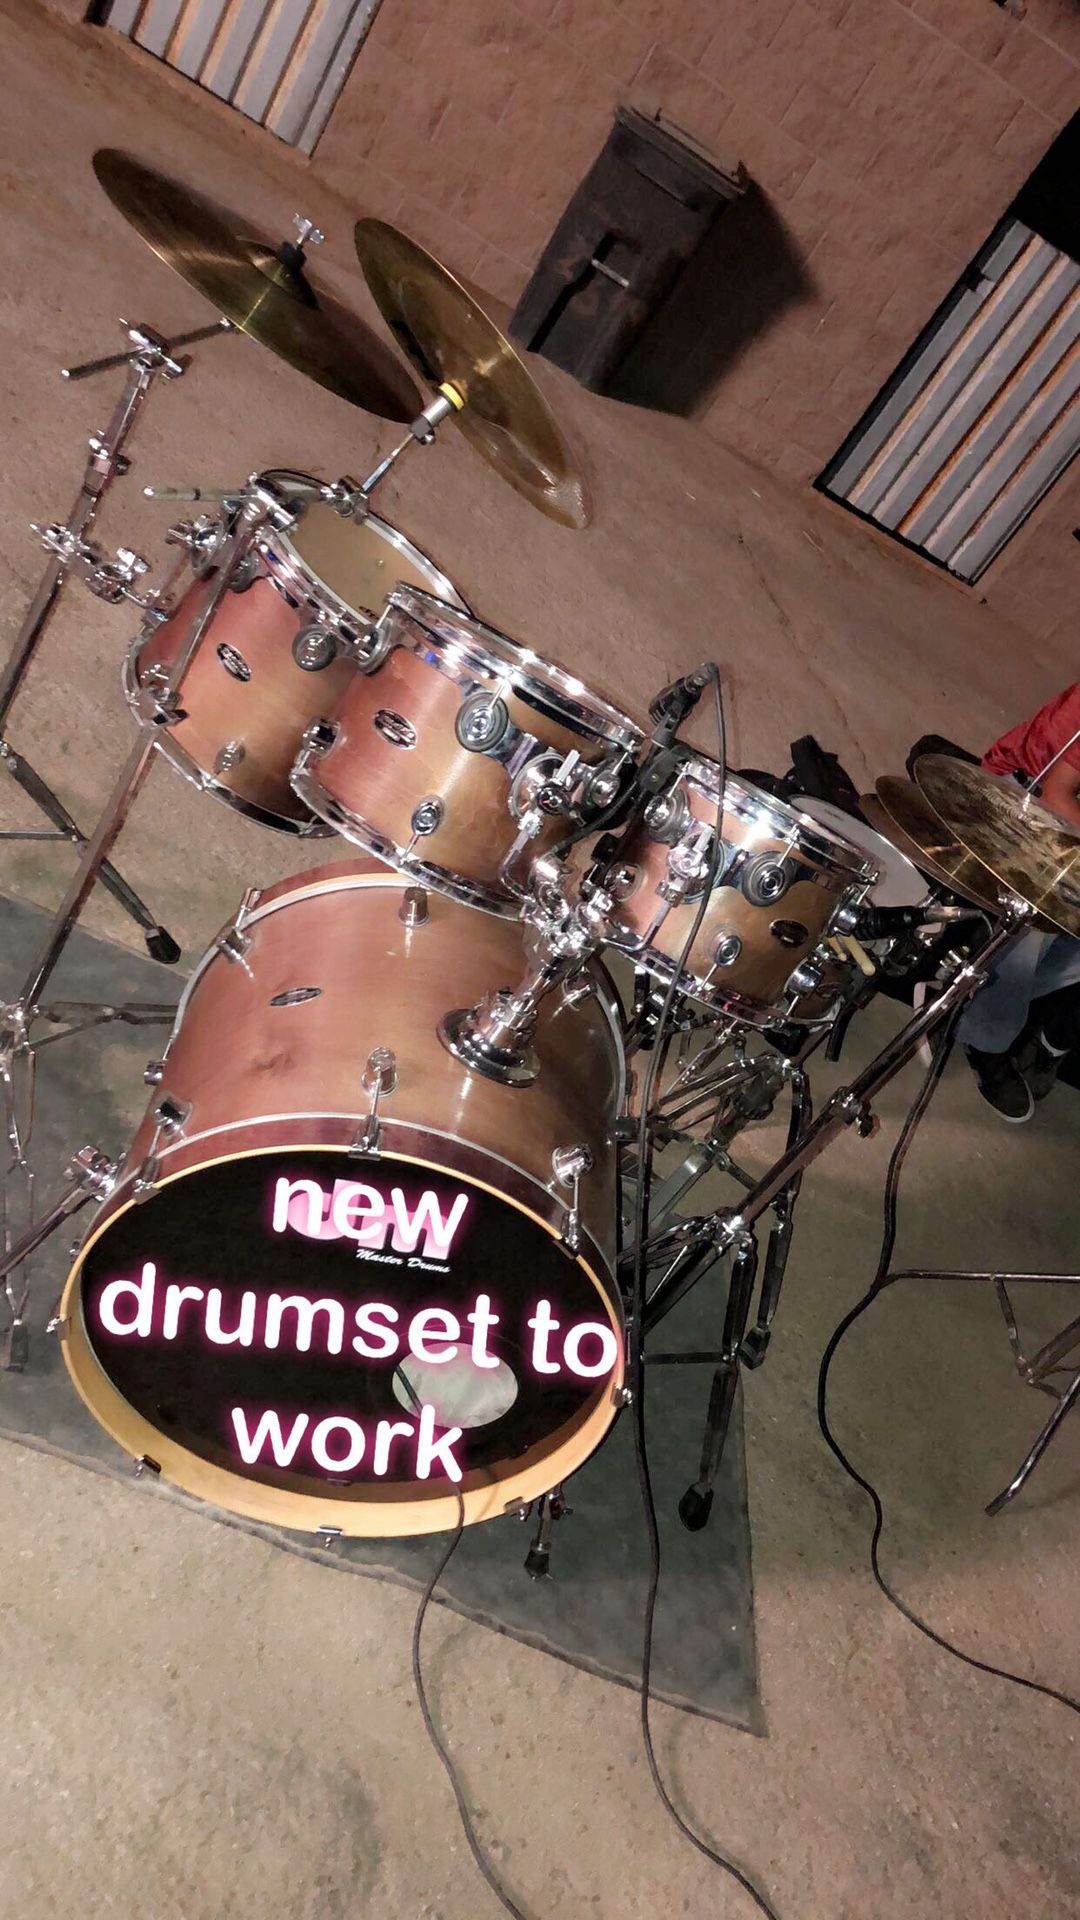 Pdp drum set 5 piece with hardware